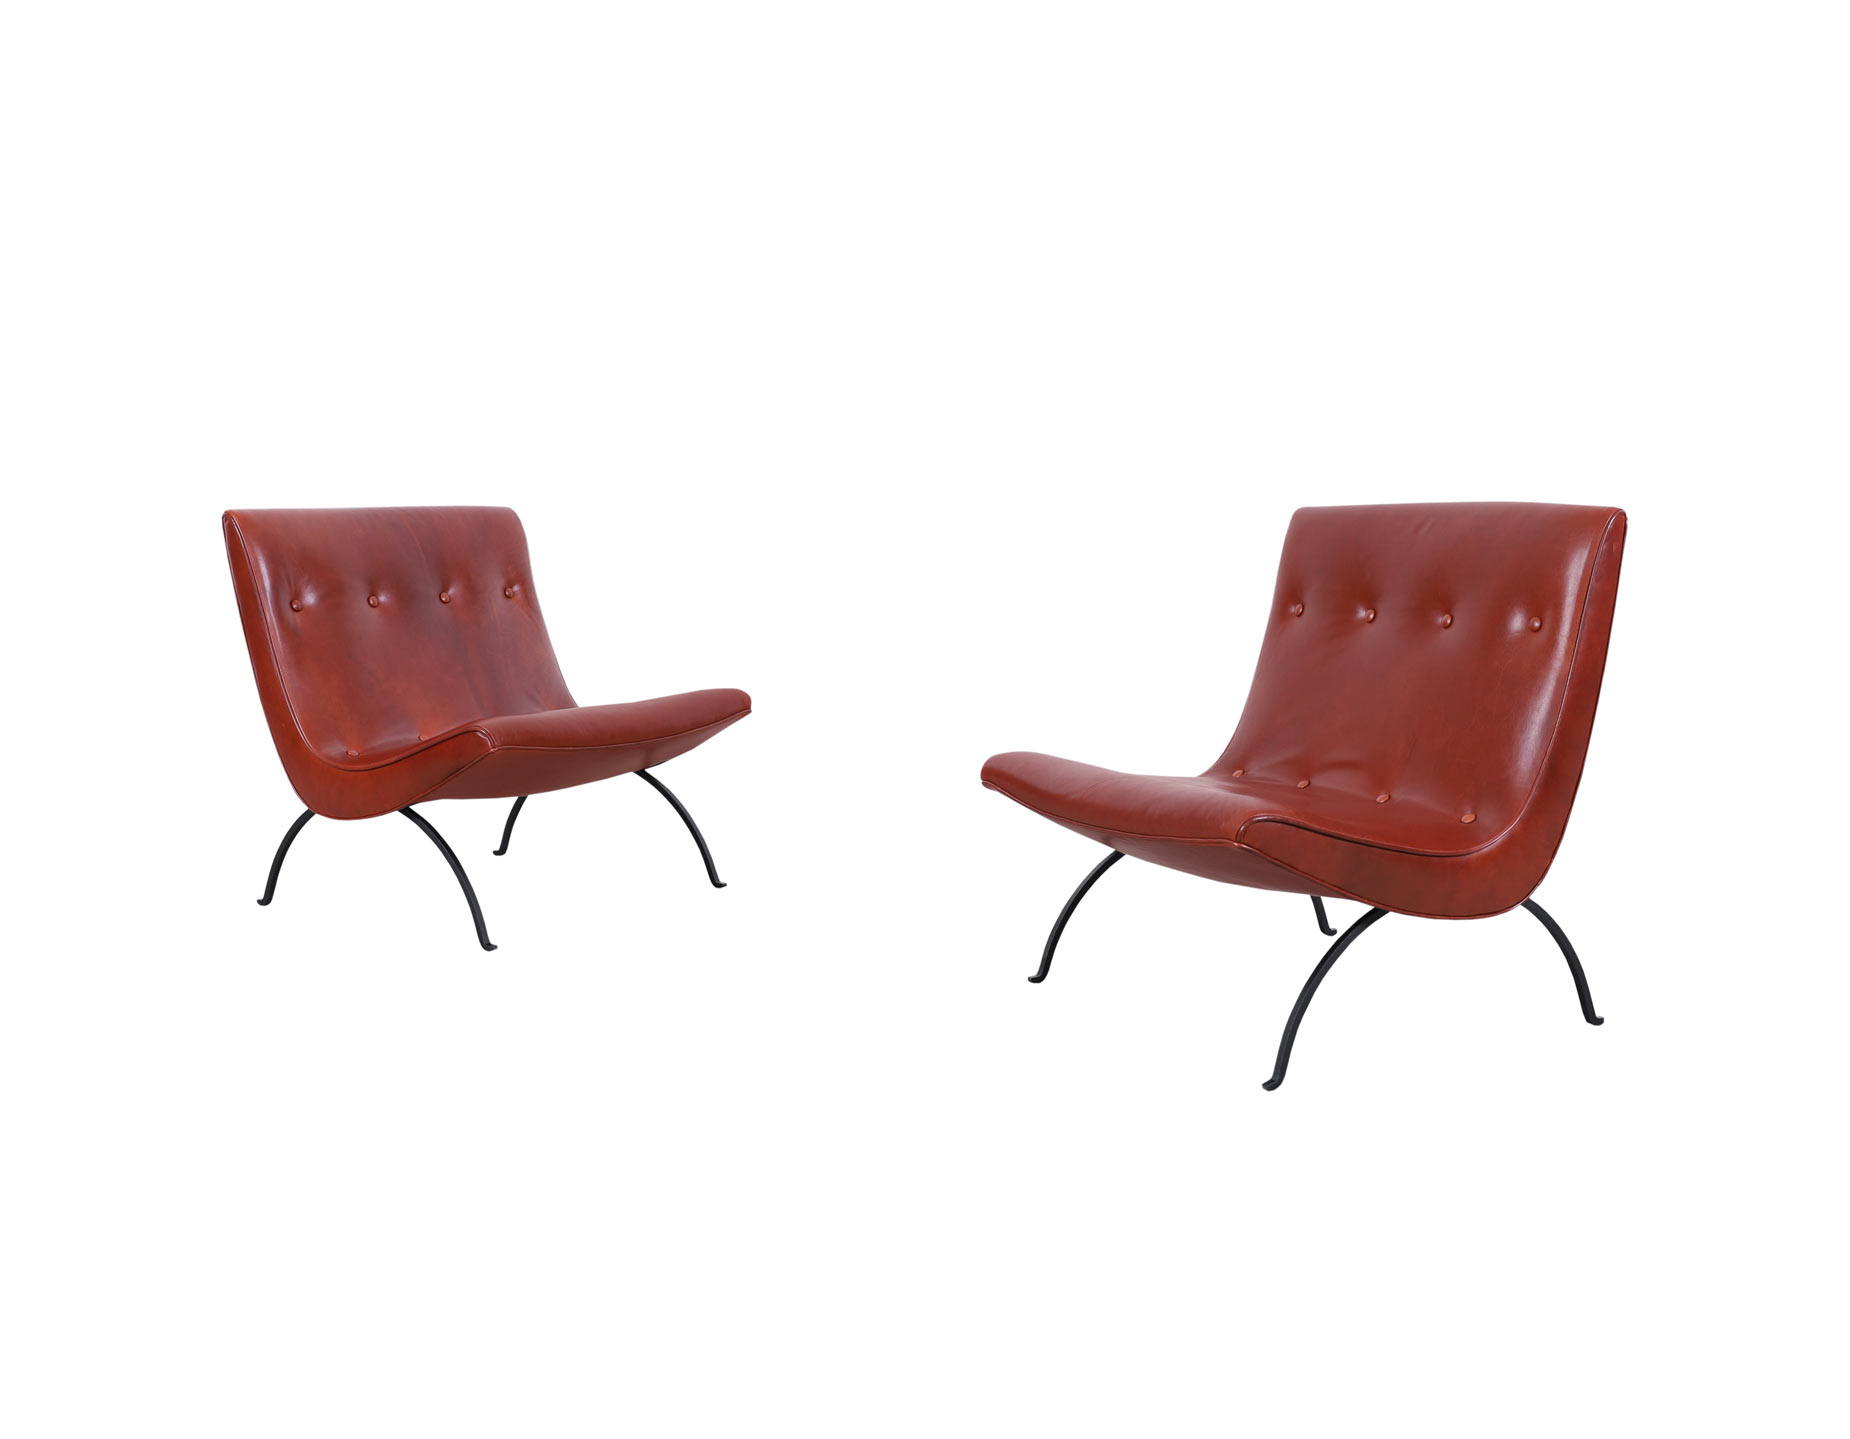 Early Leather and Iron Scoop Lounge Chairs by Milo Baughman